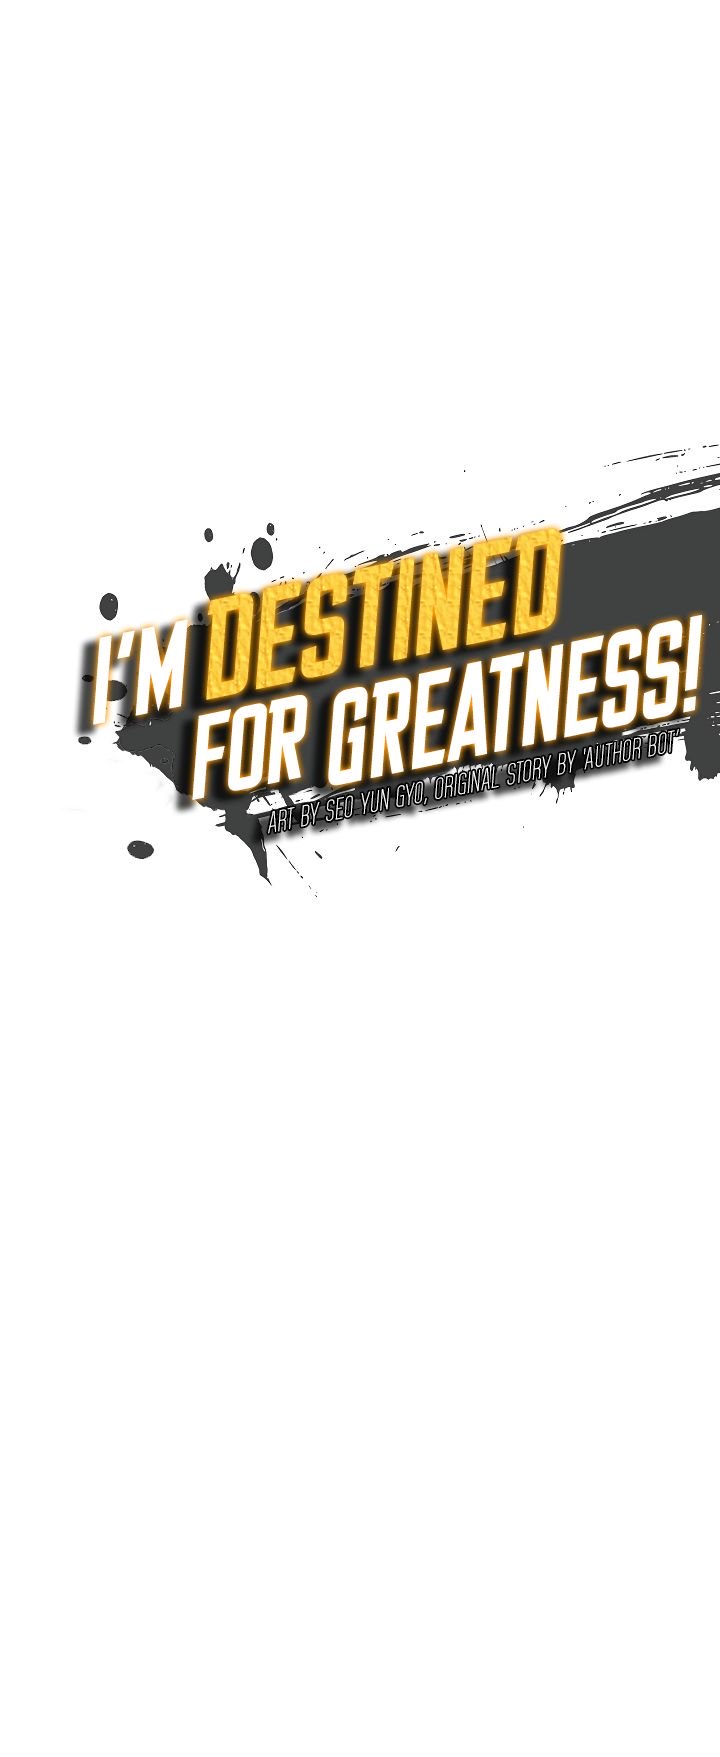 im_destined_for_greatness_30_12